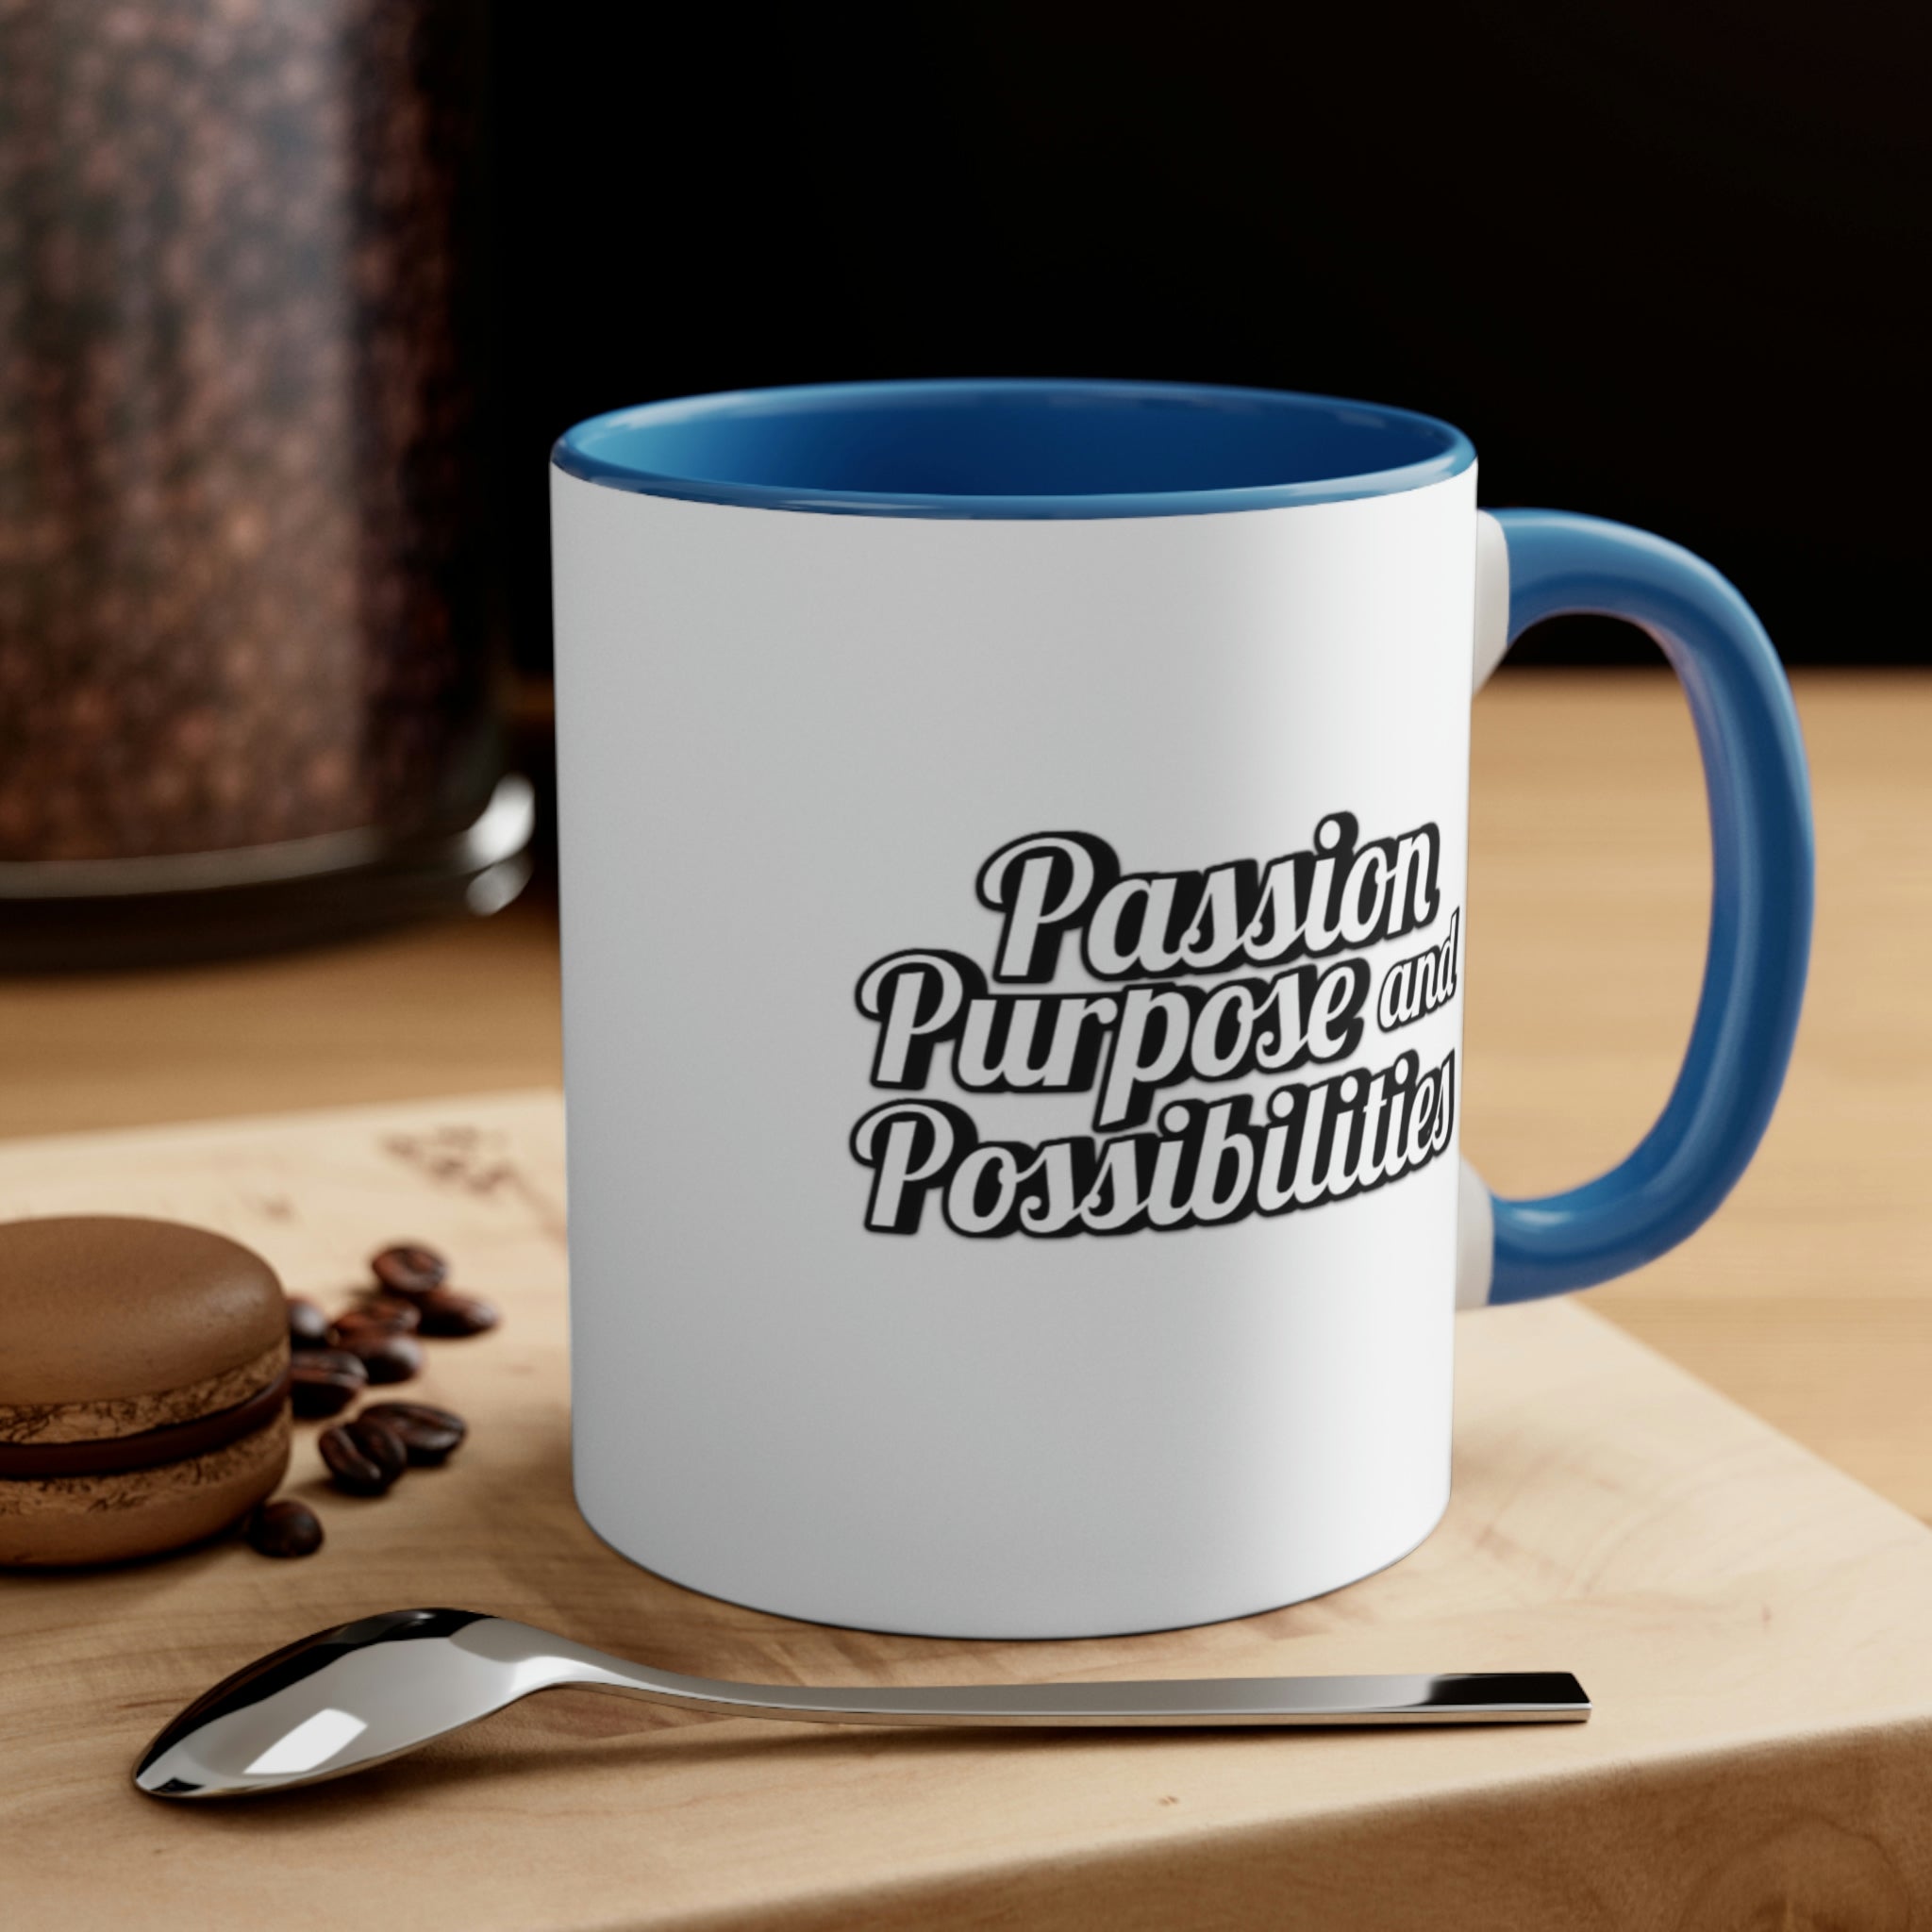 Passion Purpose and Possibilities Accent 11oz Coffee Mug - The Kindness Cause